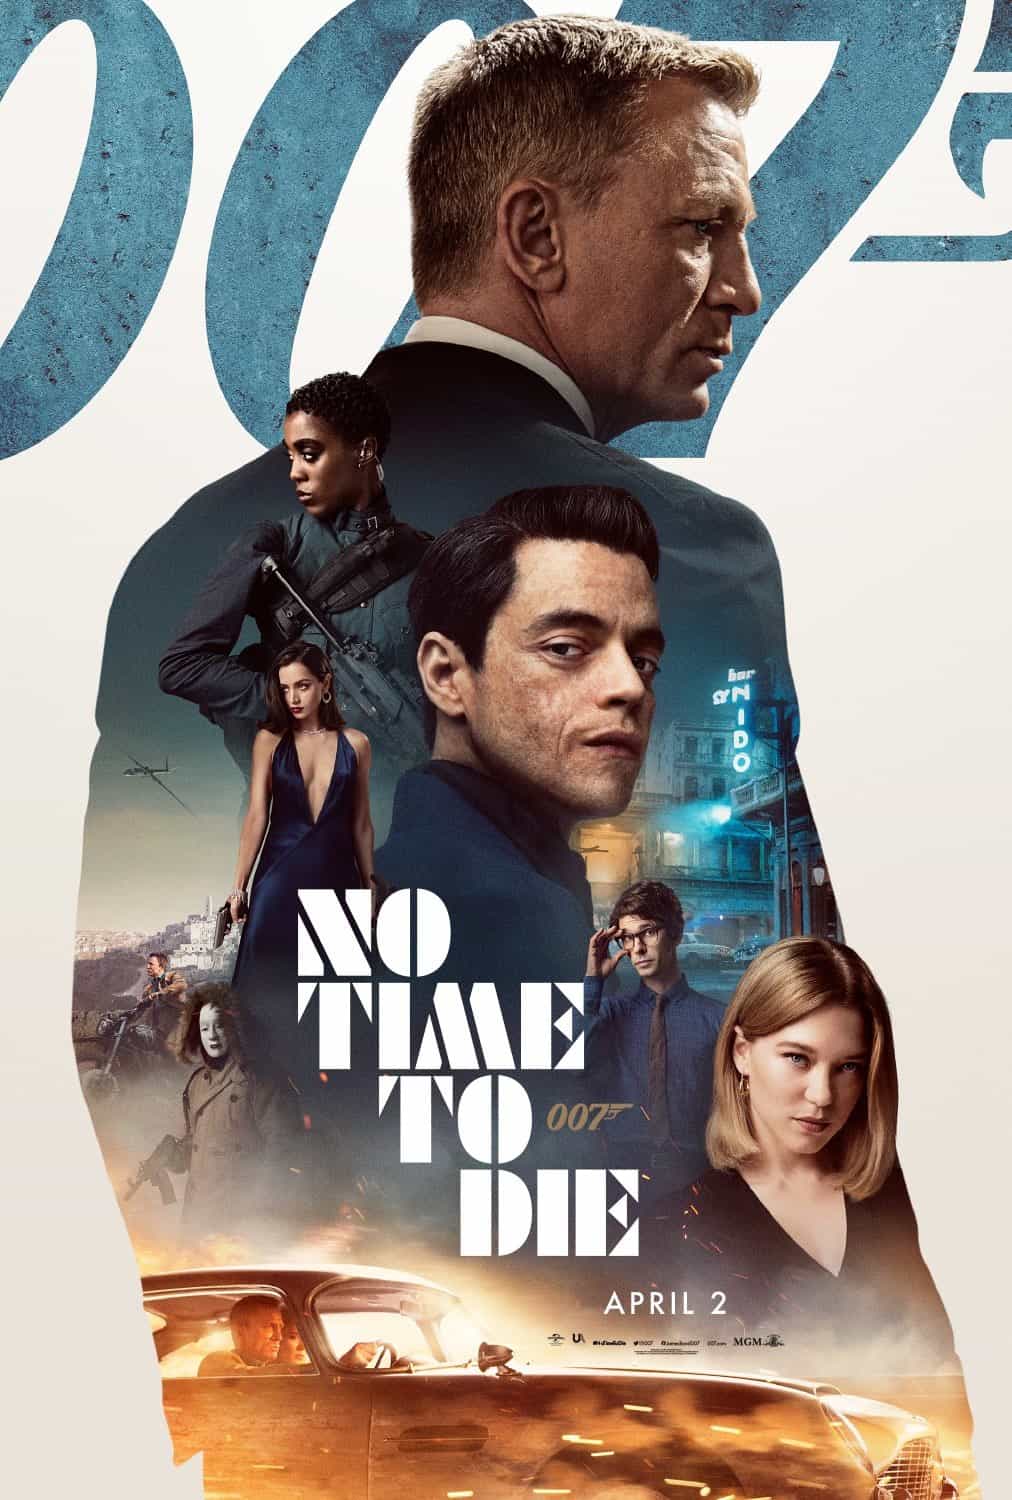 Another new poster for No Time To Die featuring Daniel Craig with a big gun